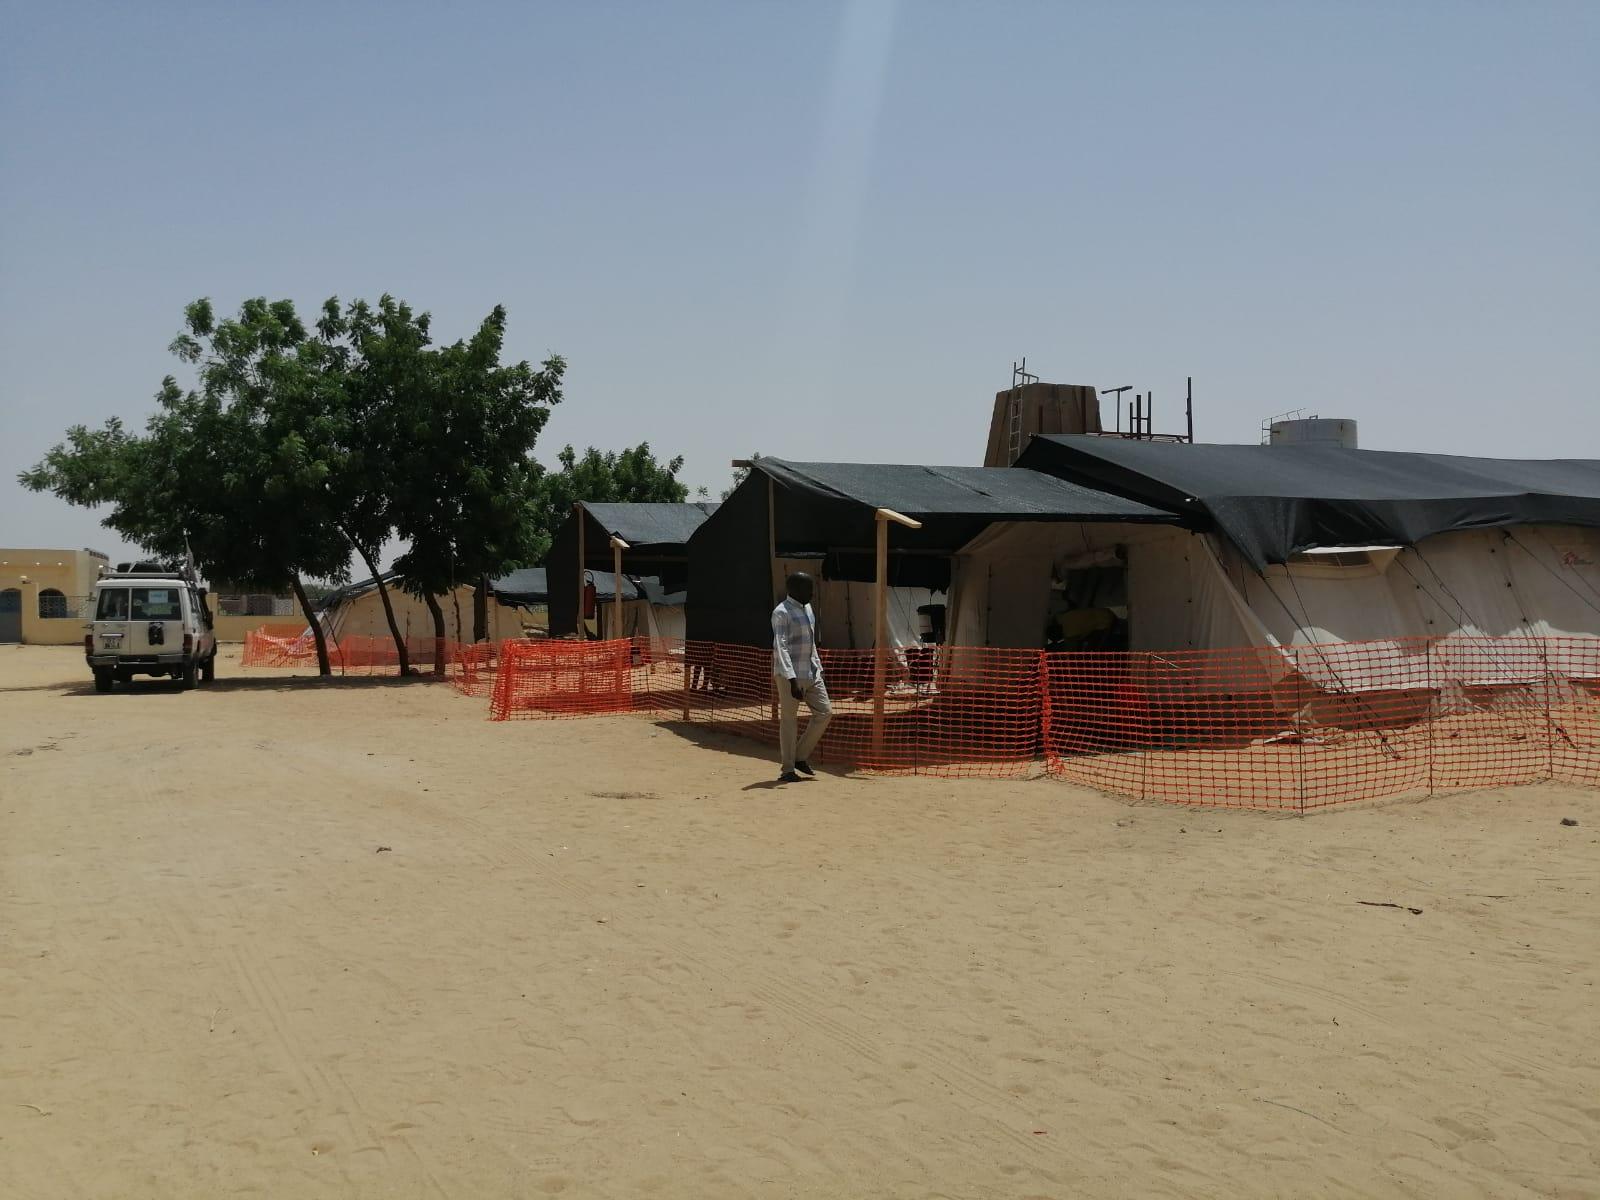 Chad: MSF teams received more than 70 wounded in Adré and are extending activities in response to the conflict in Sudan